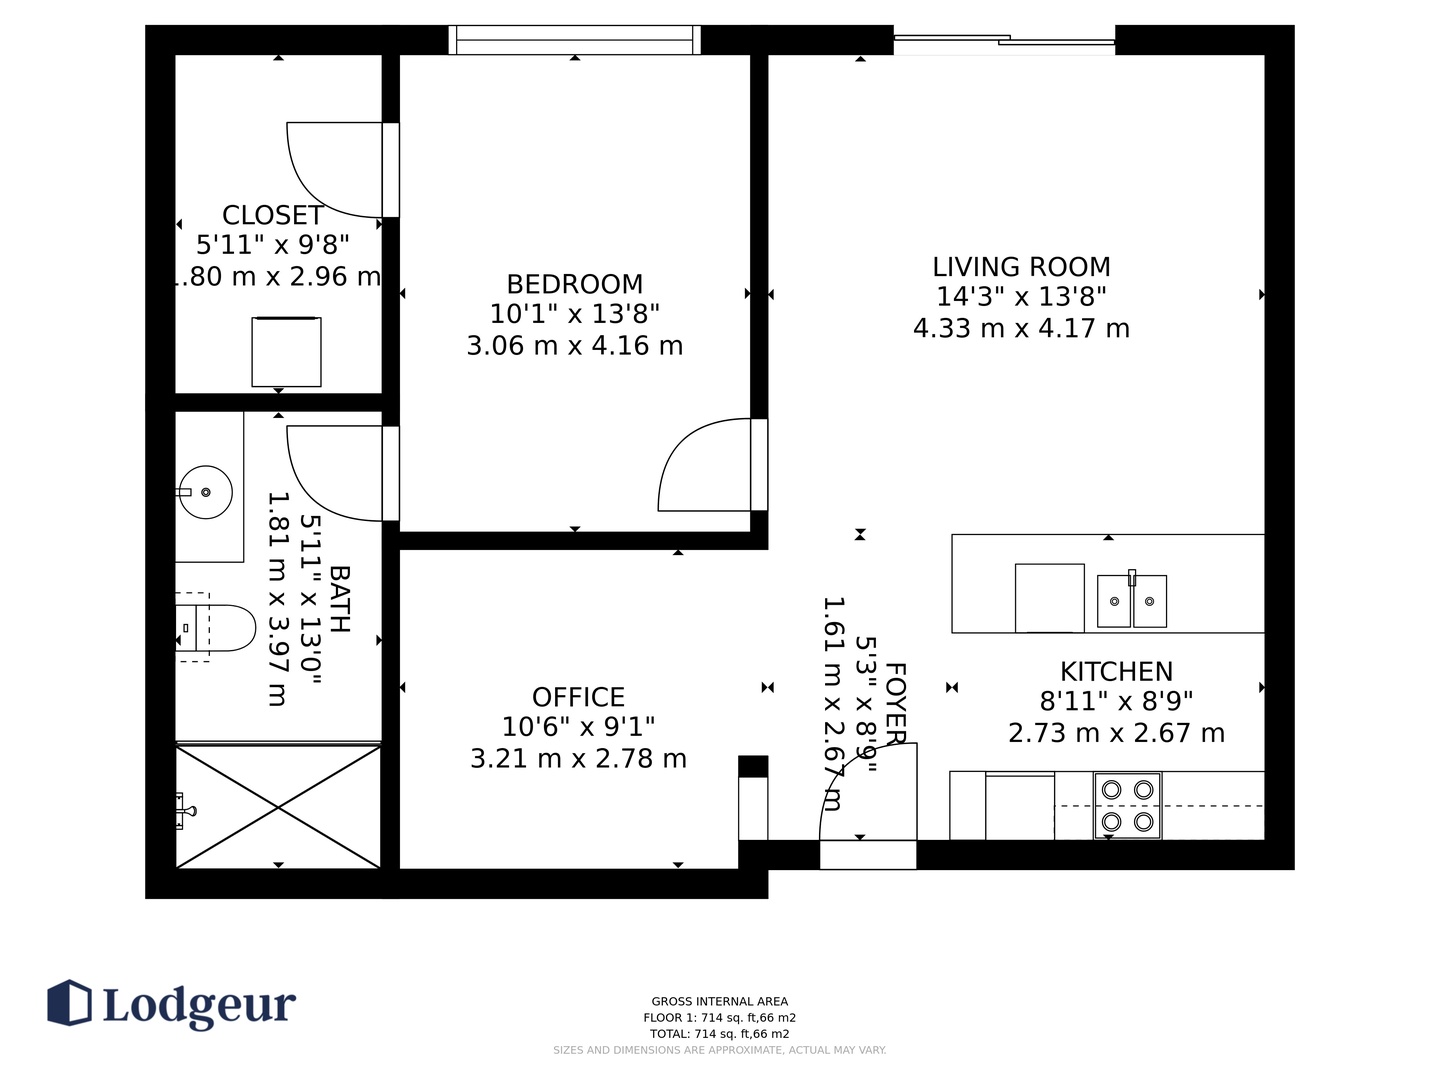 Discover the flexibility of this open-concept floor plan for a spacious living space.